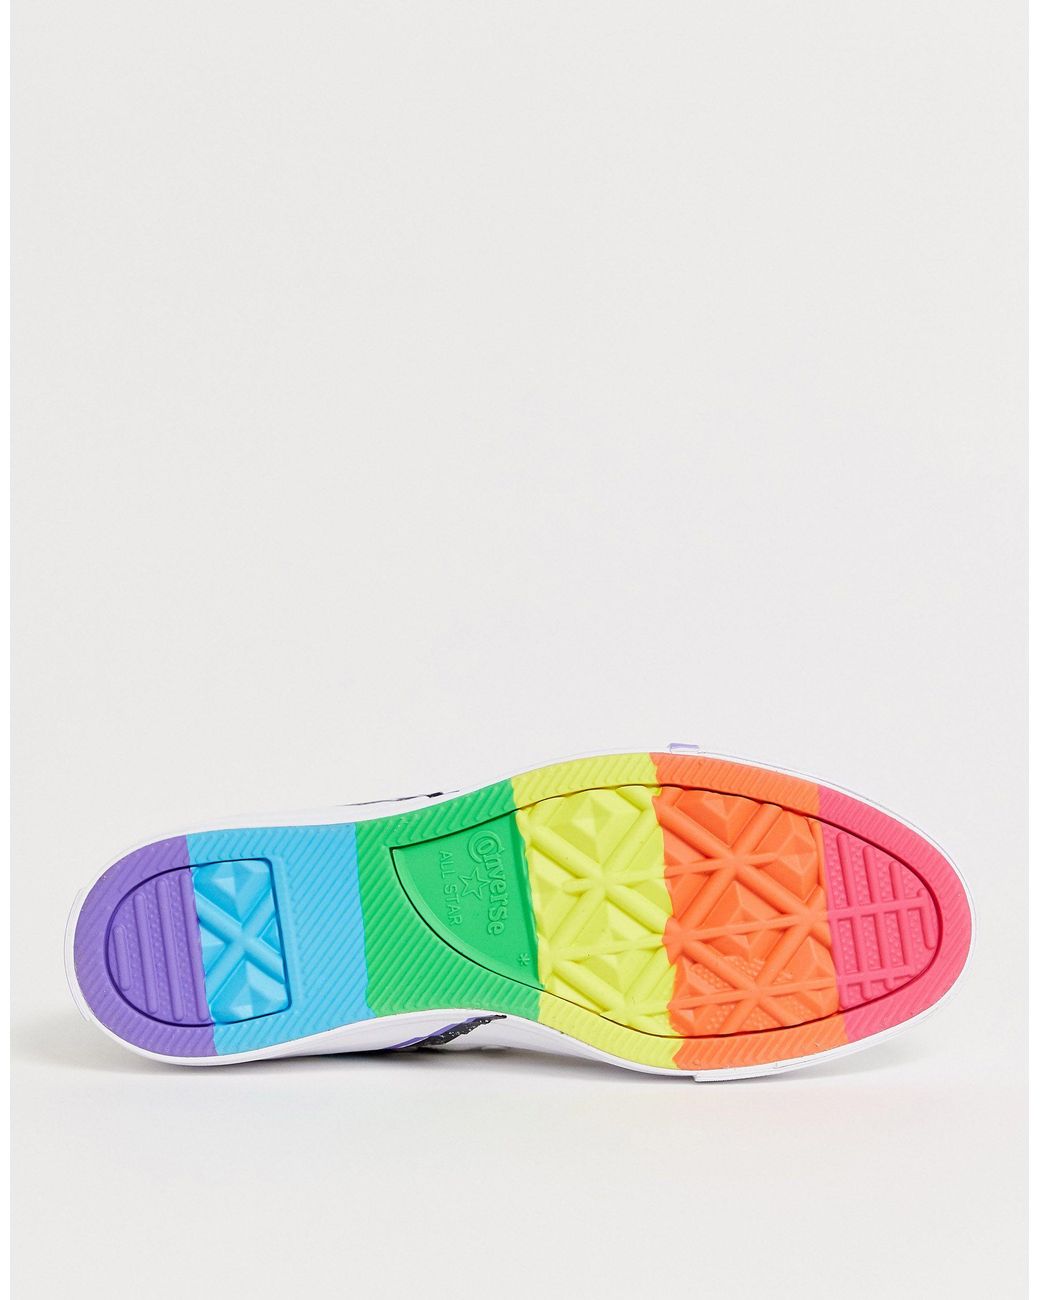 Converse Pride Chuck Taylor Hi All Star And Rainbow Lightning Bolt Trainers  in White | Lyst